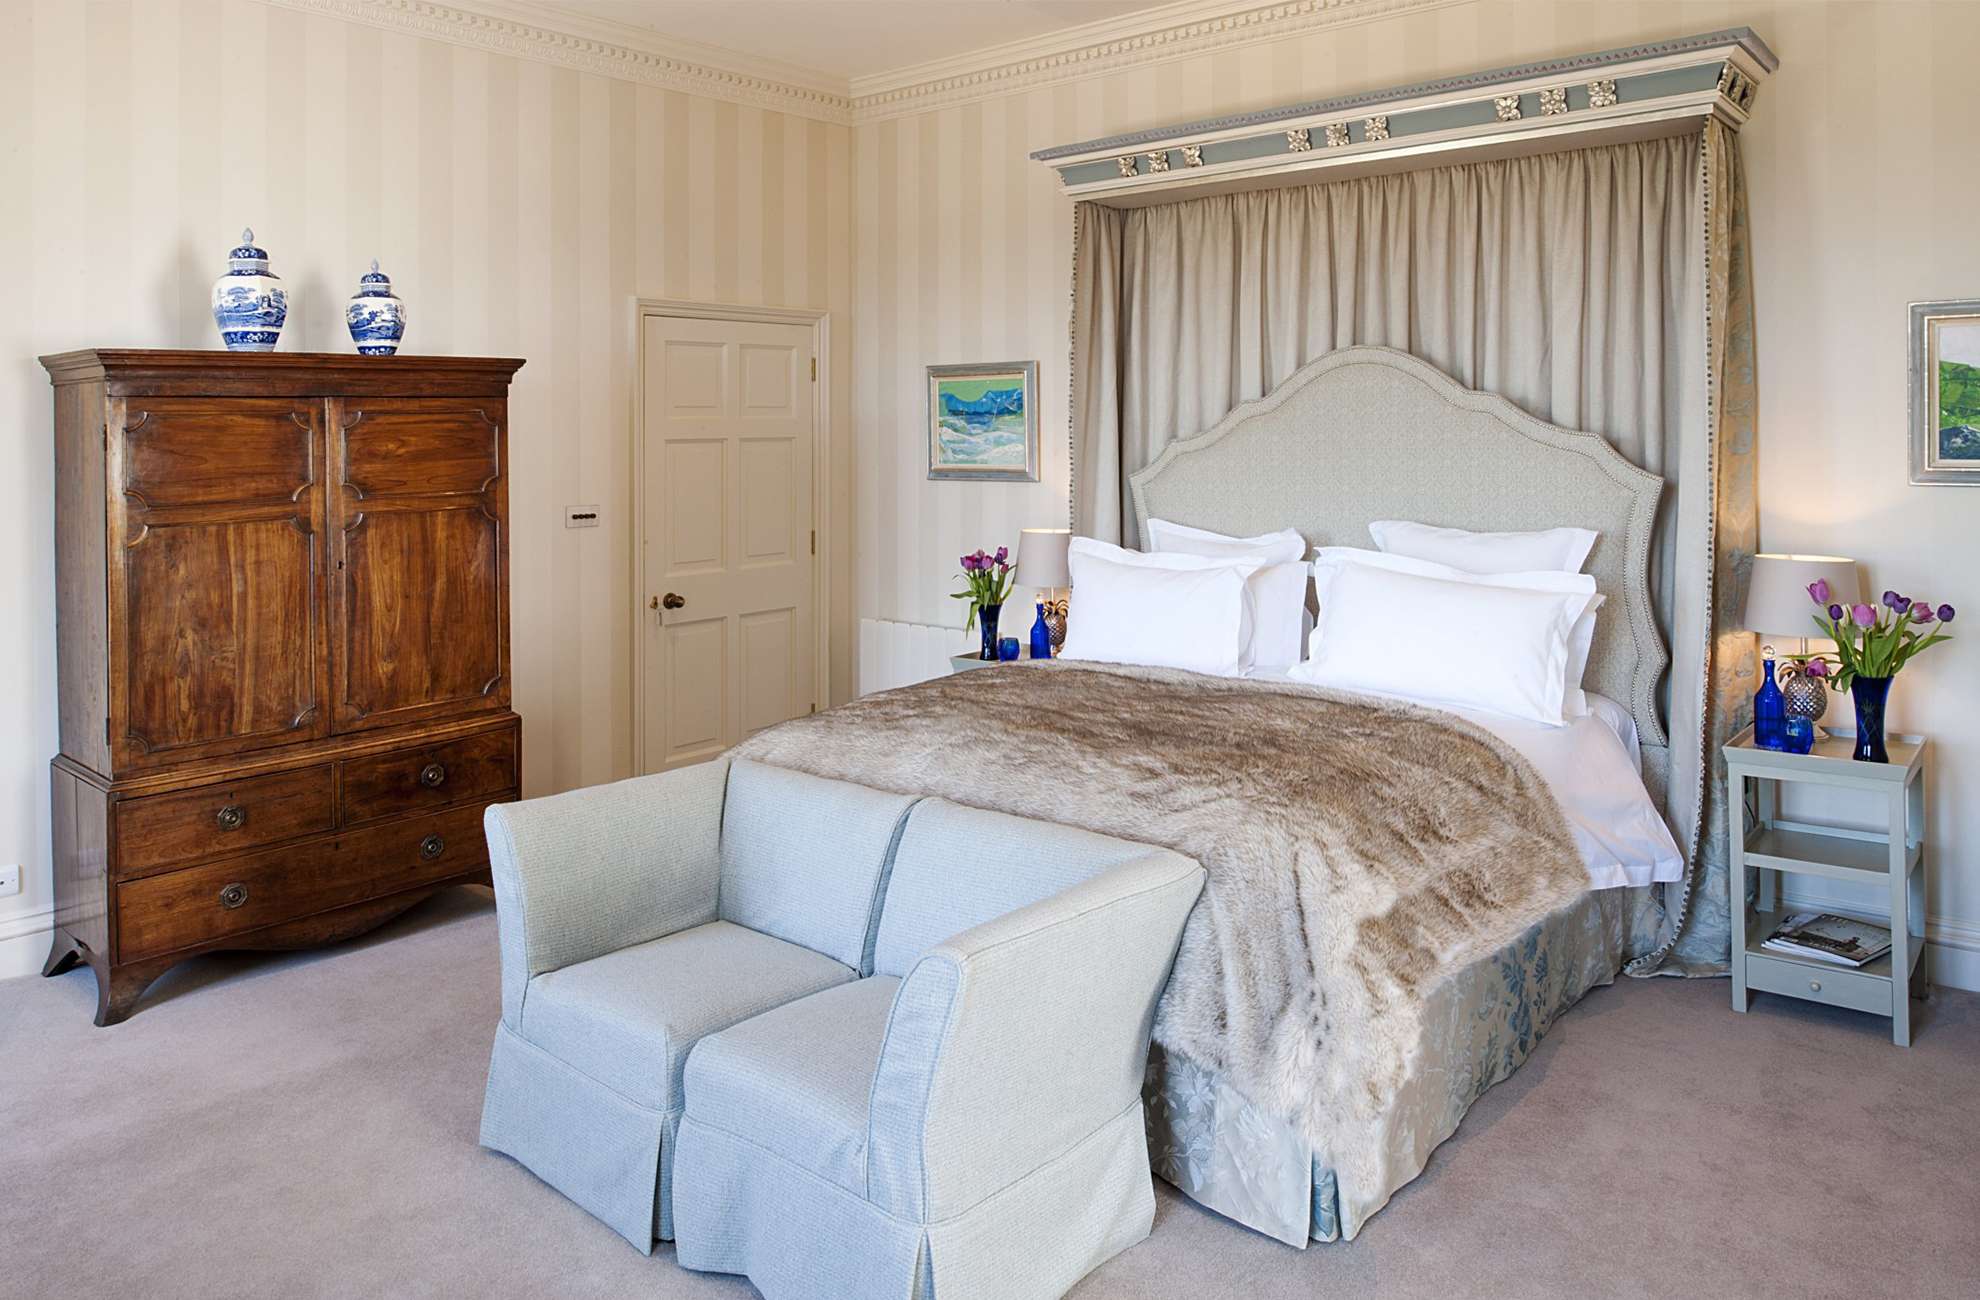 Salamanca bedroom luxurious accommodation at Combermere Abbey